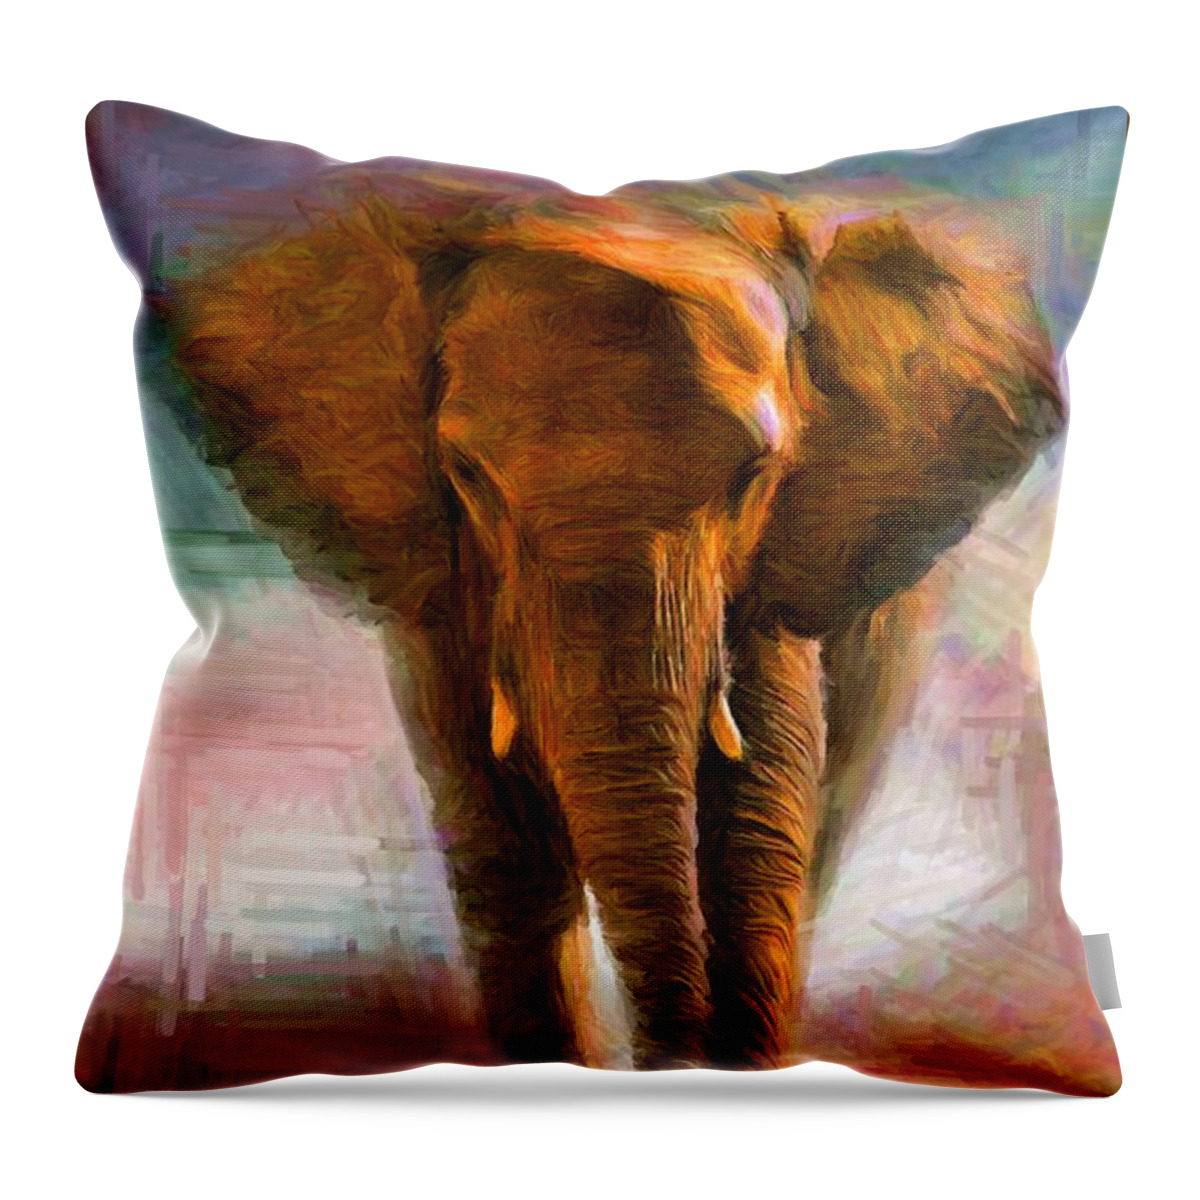 Animals Throw Pillow featuring the digital art Elephant 1 by Caito Junqueira